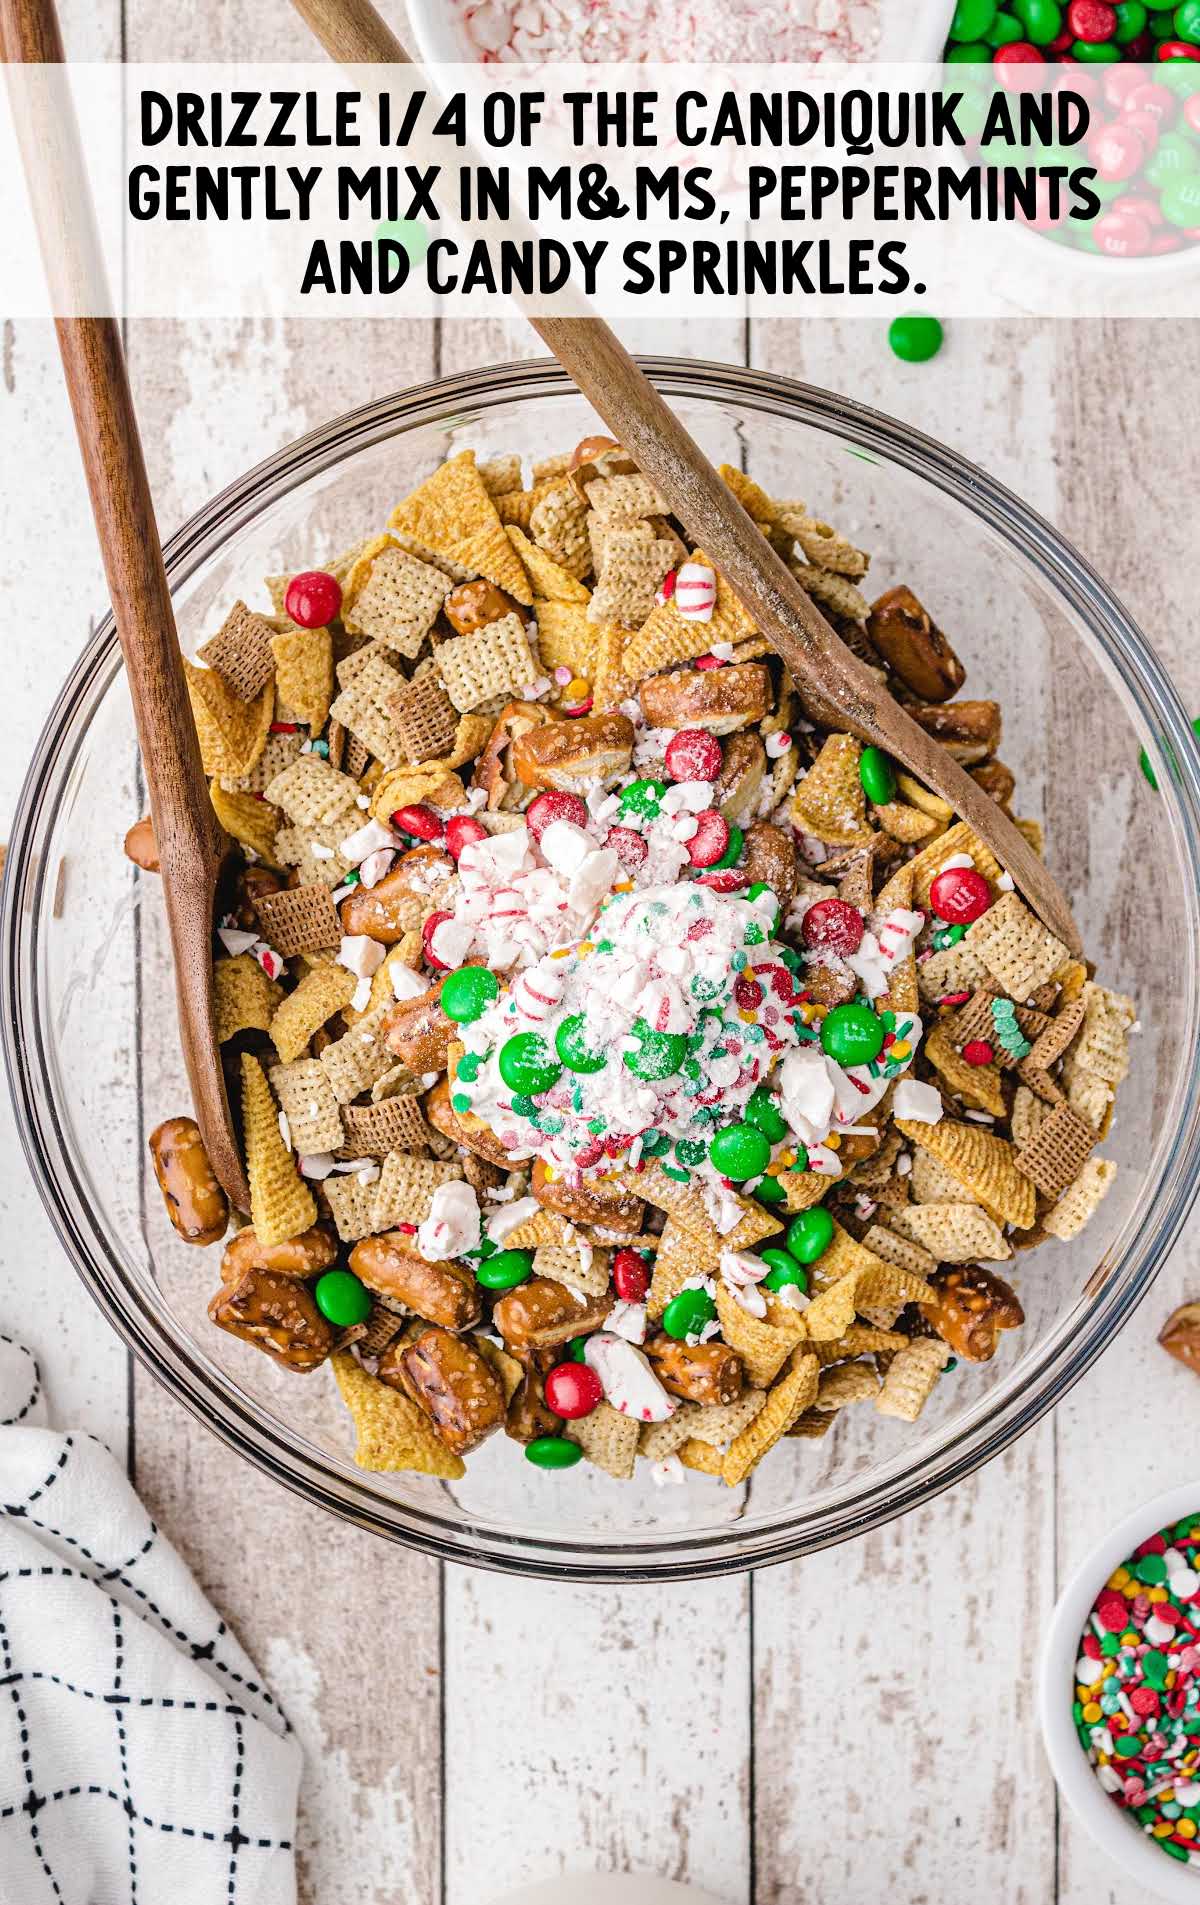 candiquick, m&m's, peppermints and candy sprinkled over the chex mix